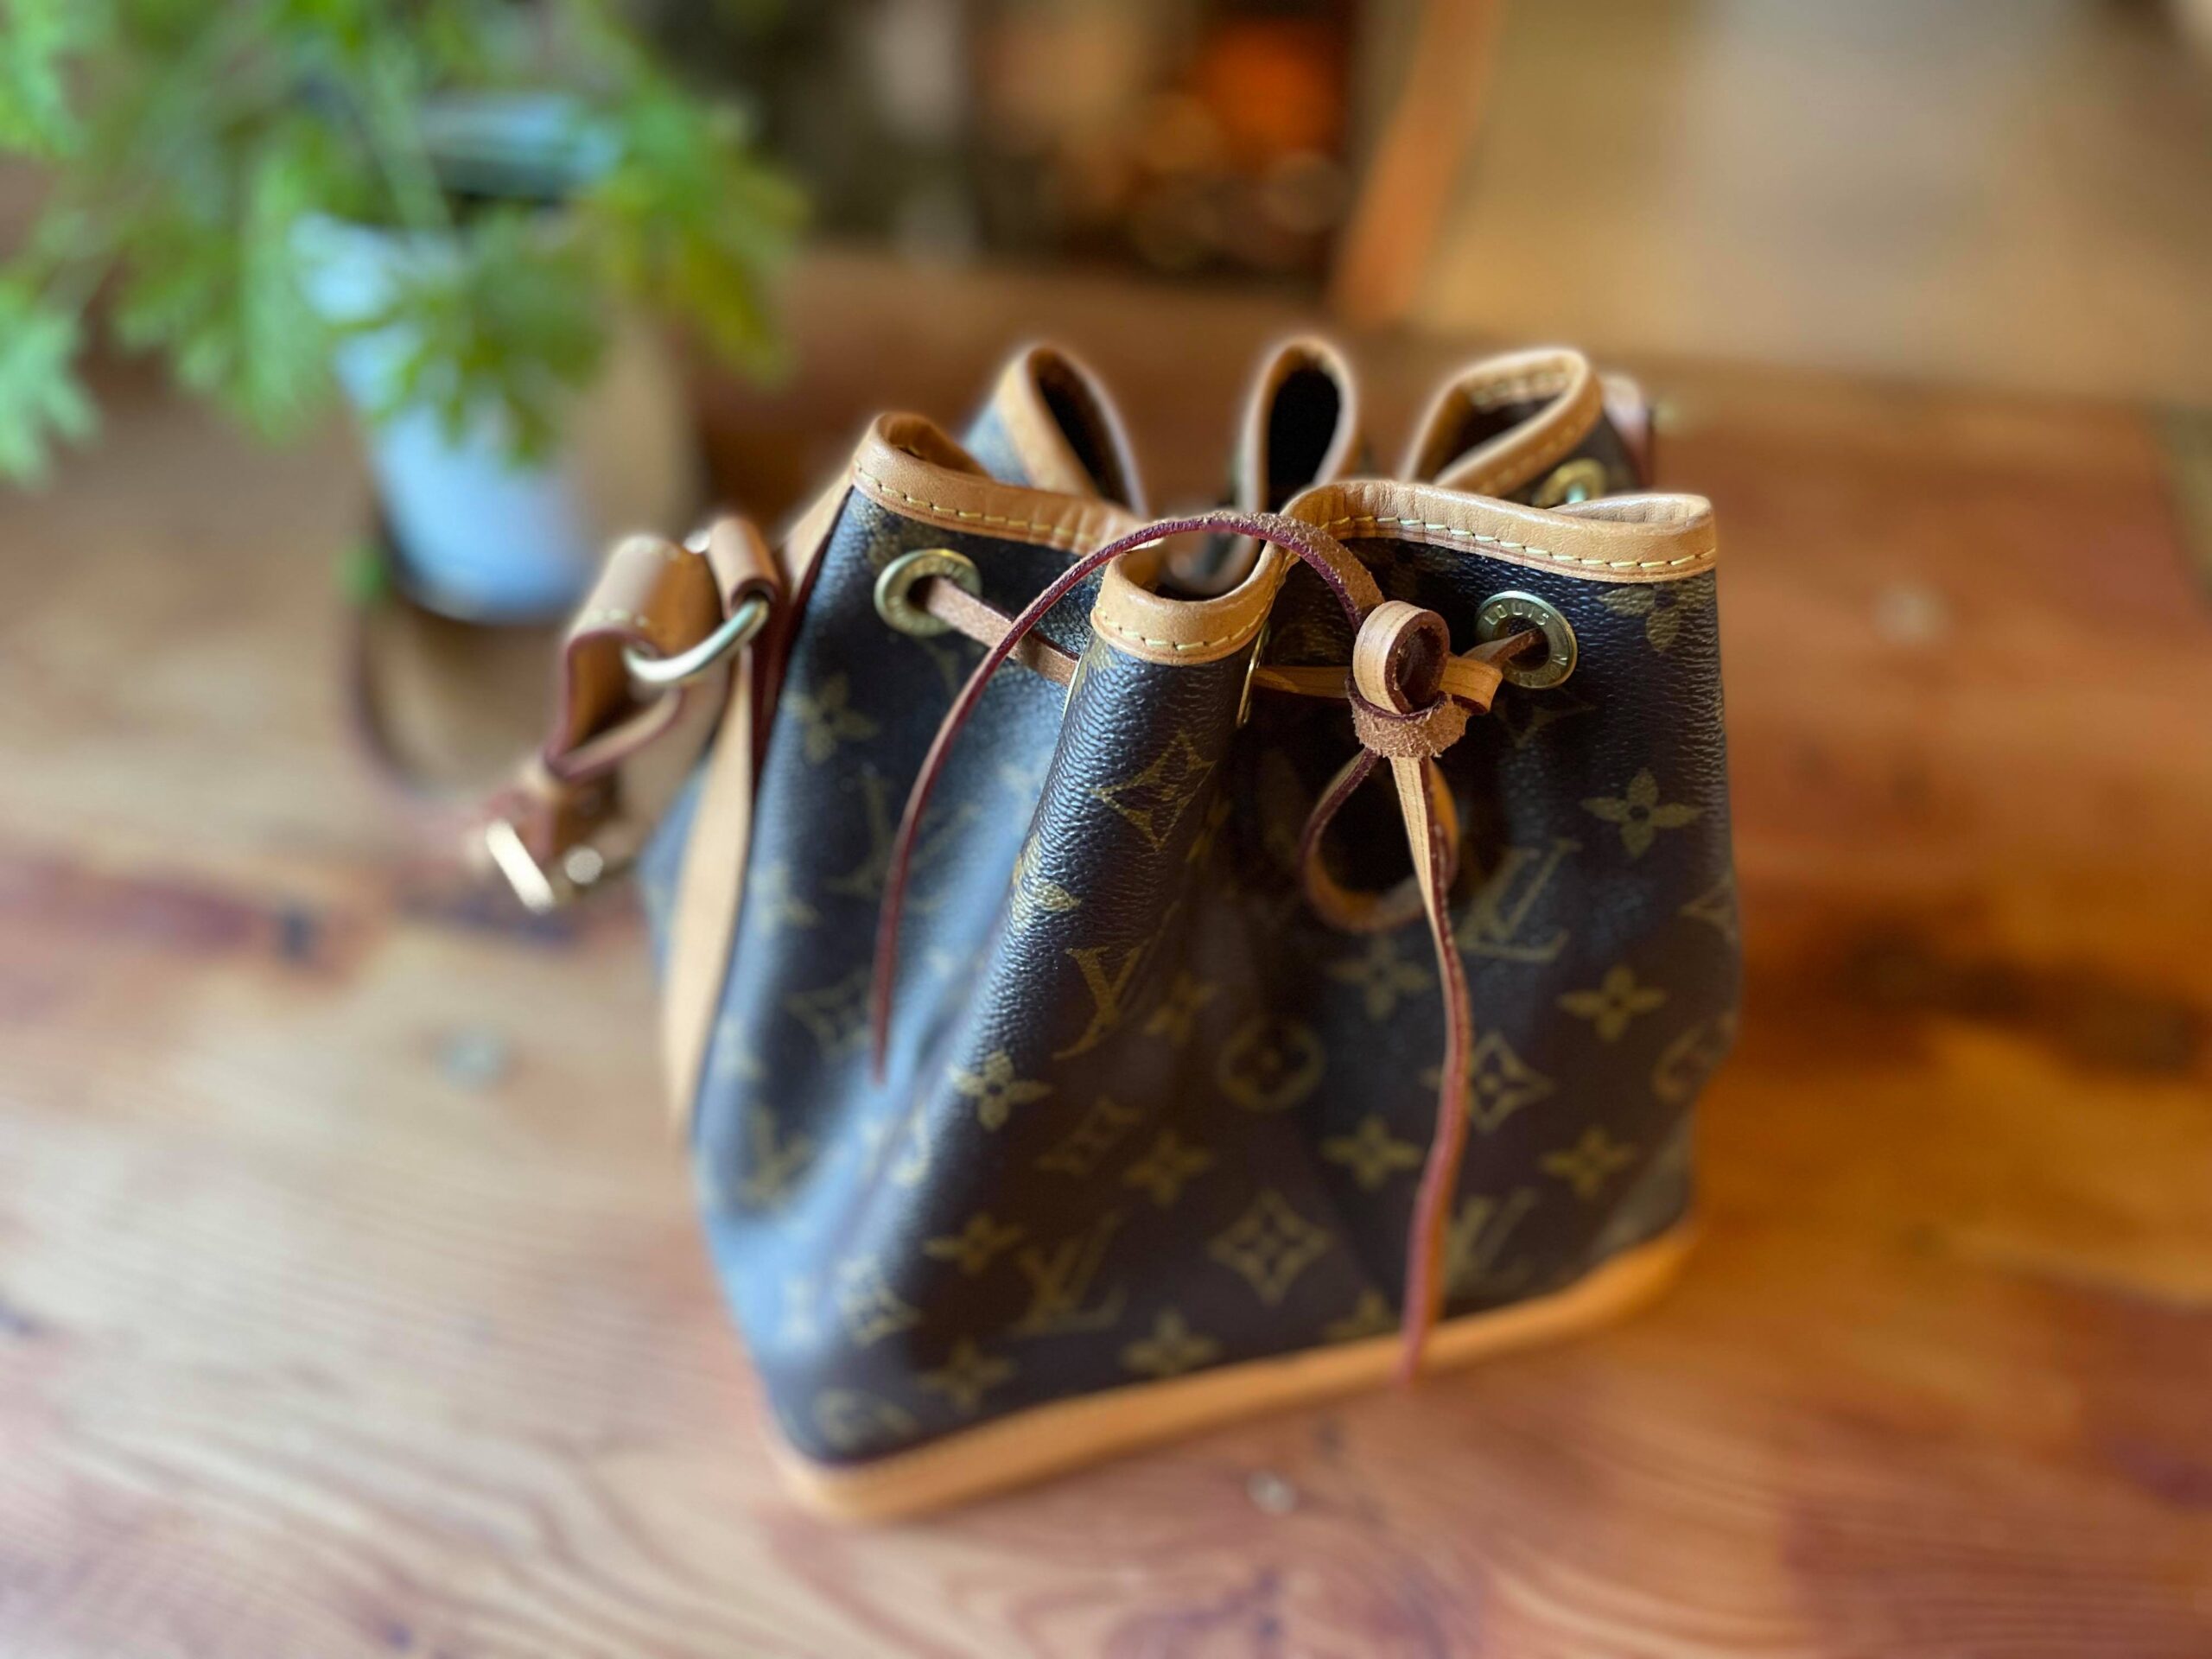 A Louis Vuitton bag, after having the strap repaired